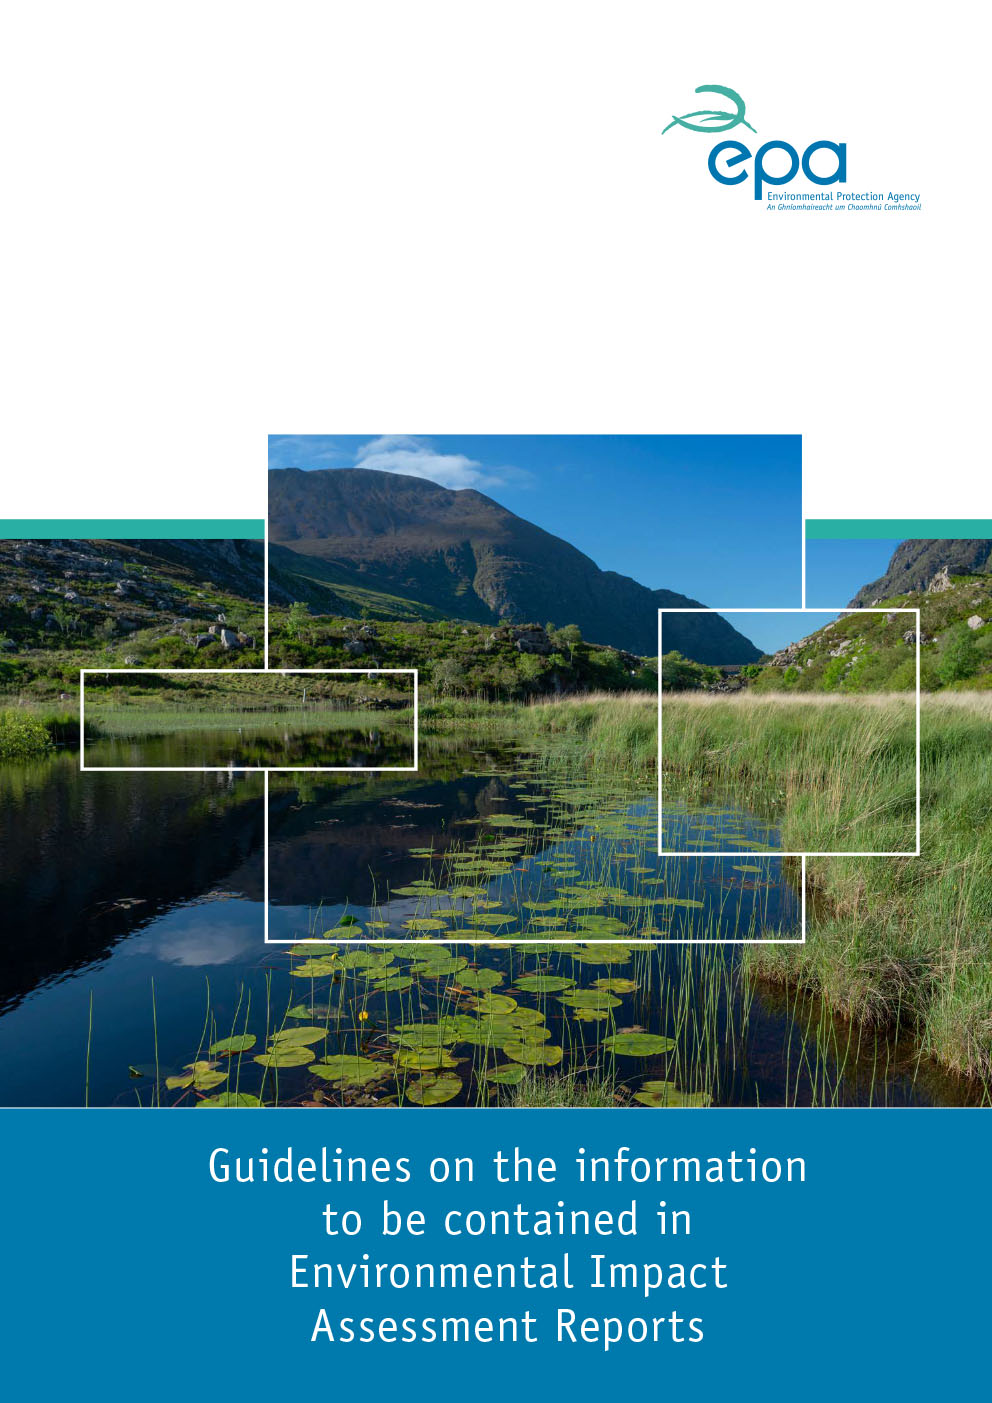 Guidelines on the information to be contained in EIAR